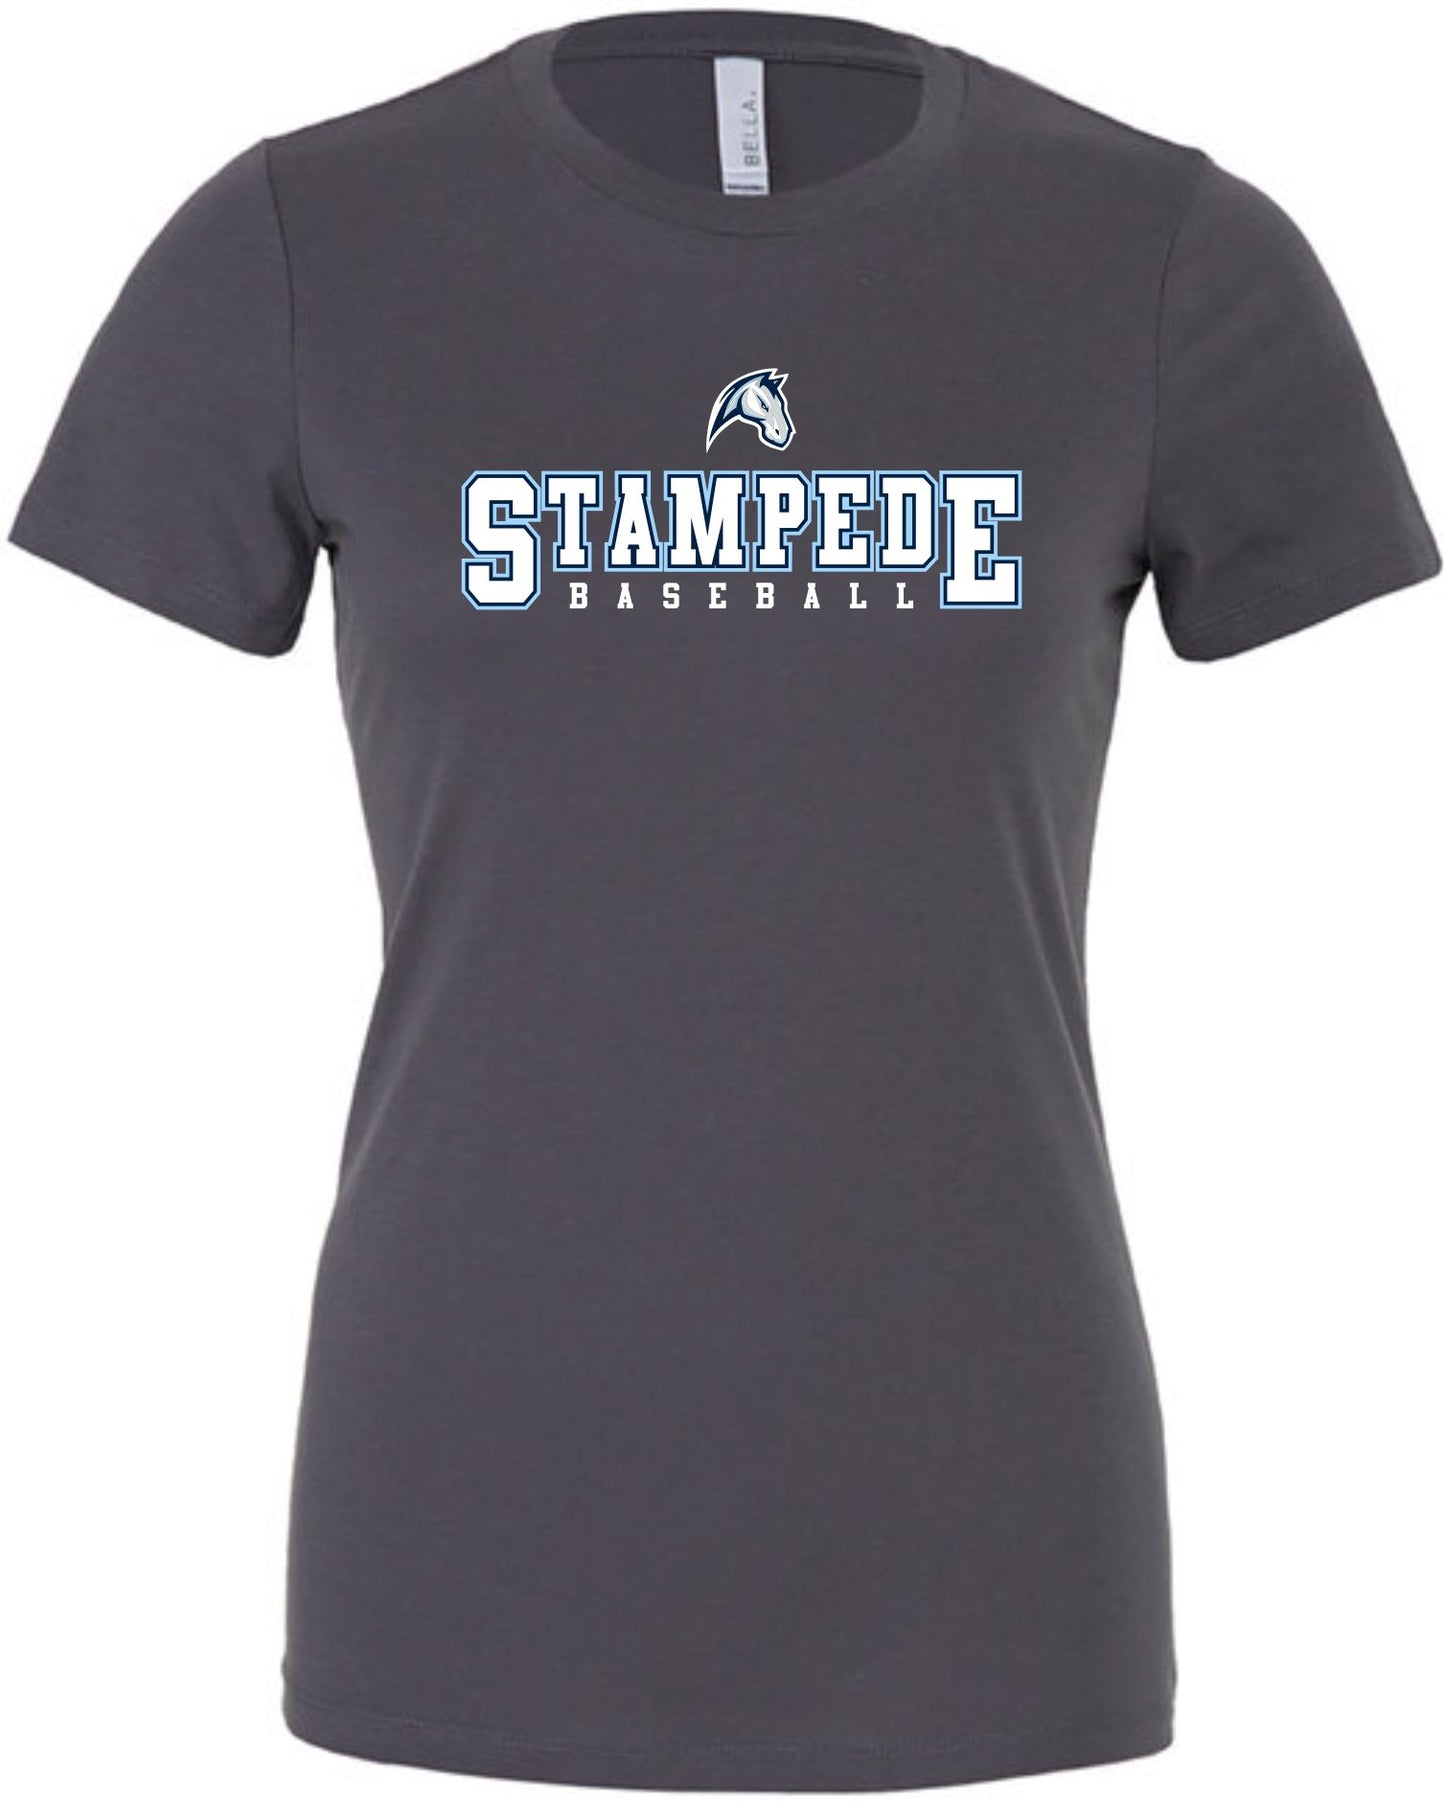 Stampede Women's Fitted T-Shirt